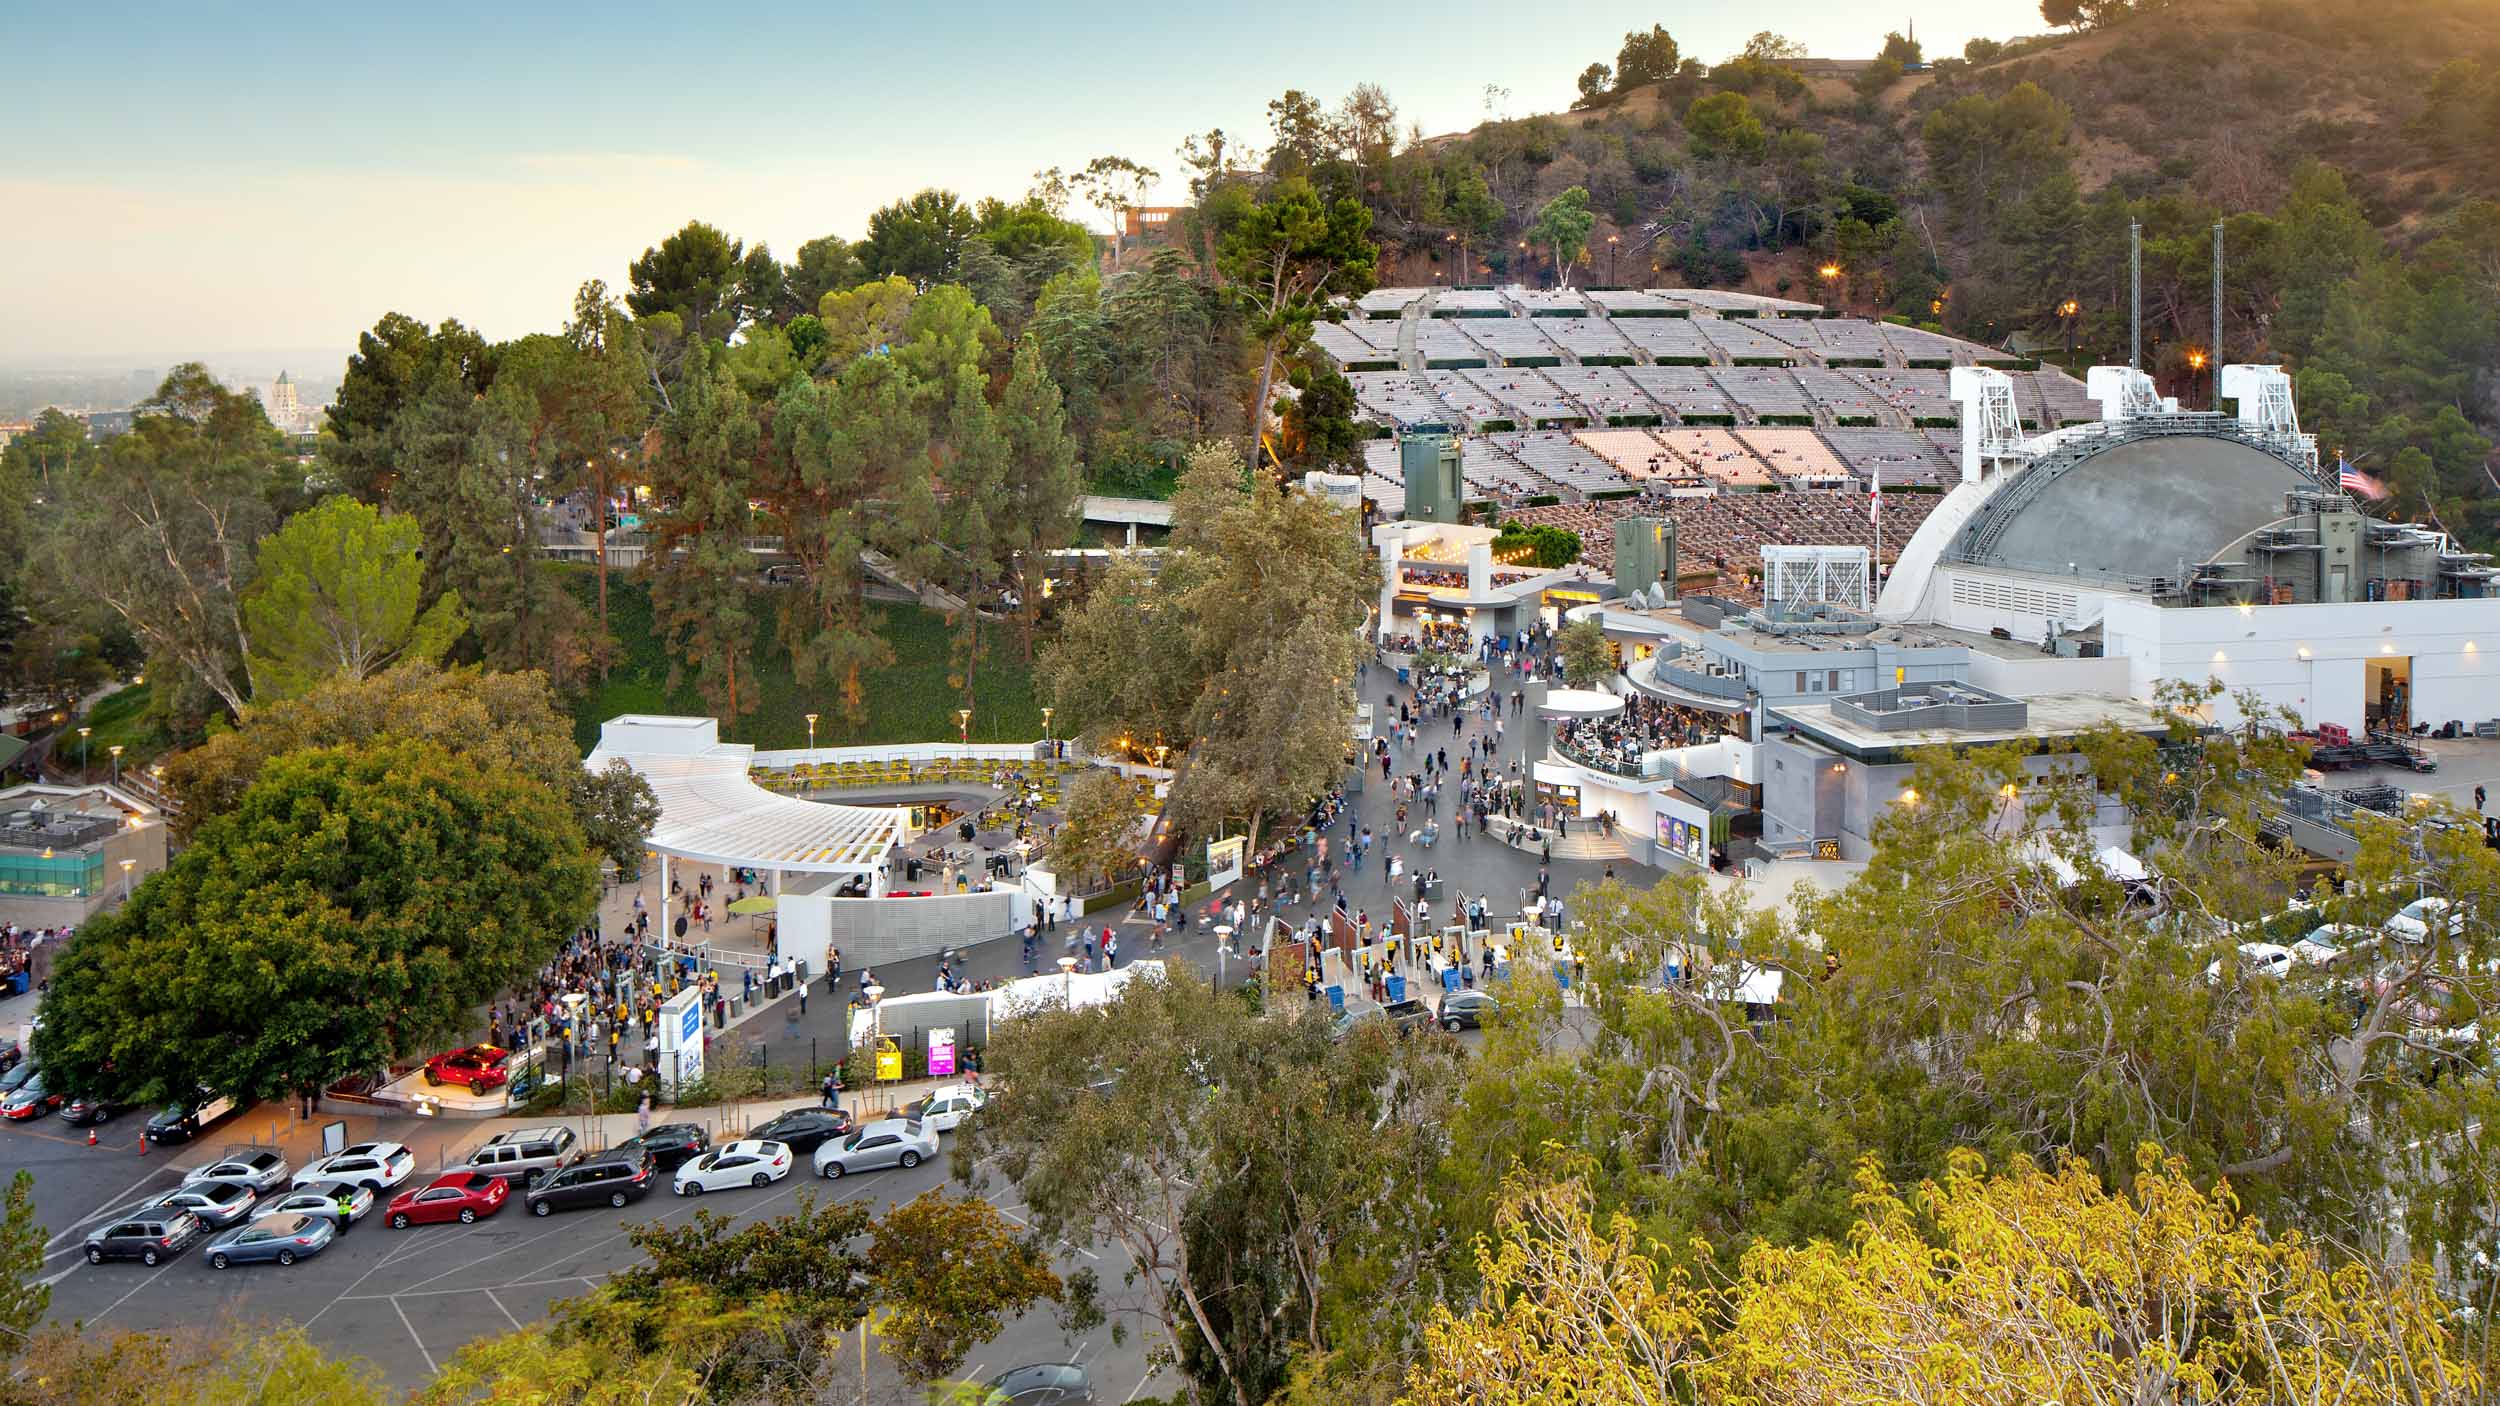 Aerial of entertainment venue at Hollywood Bowl